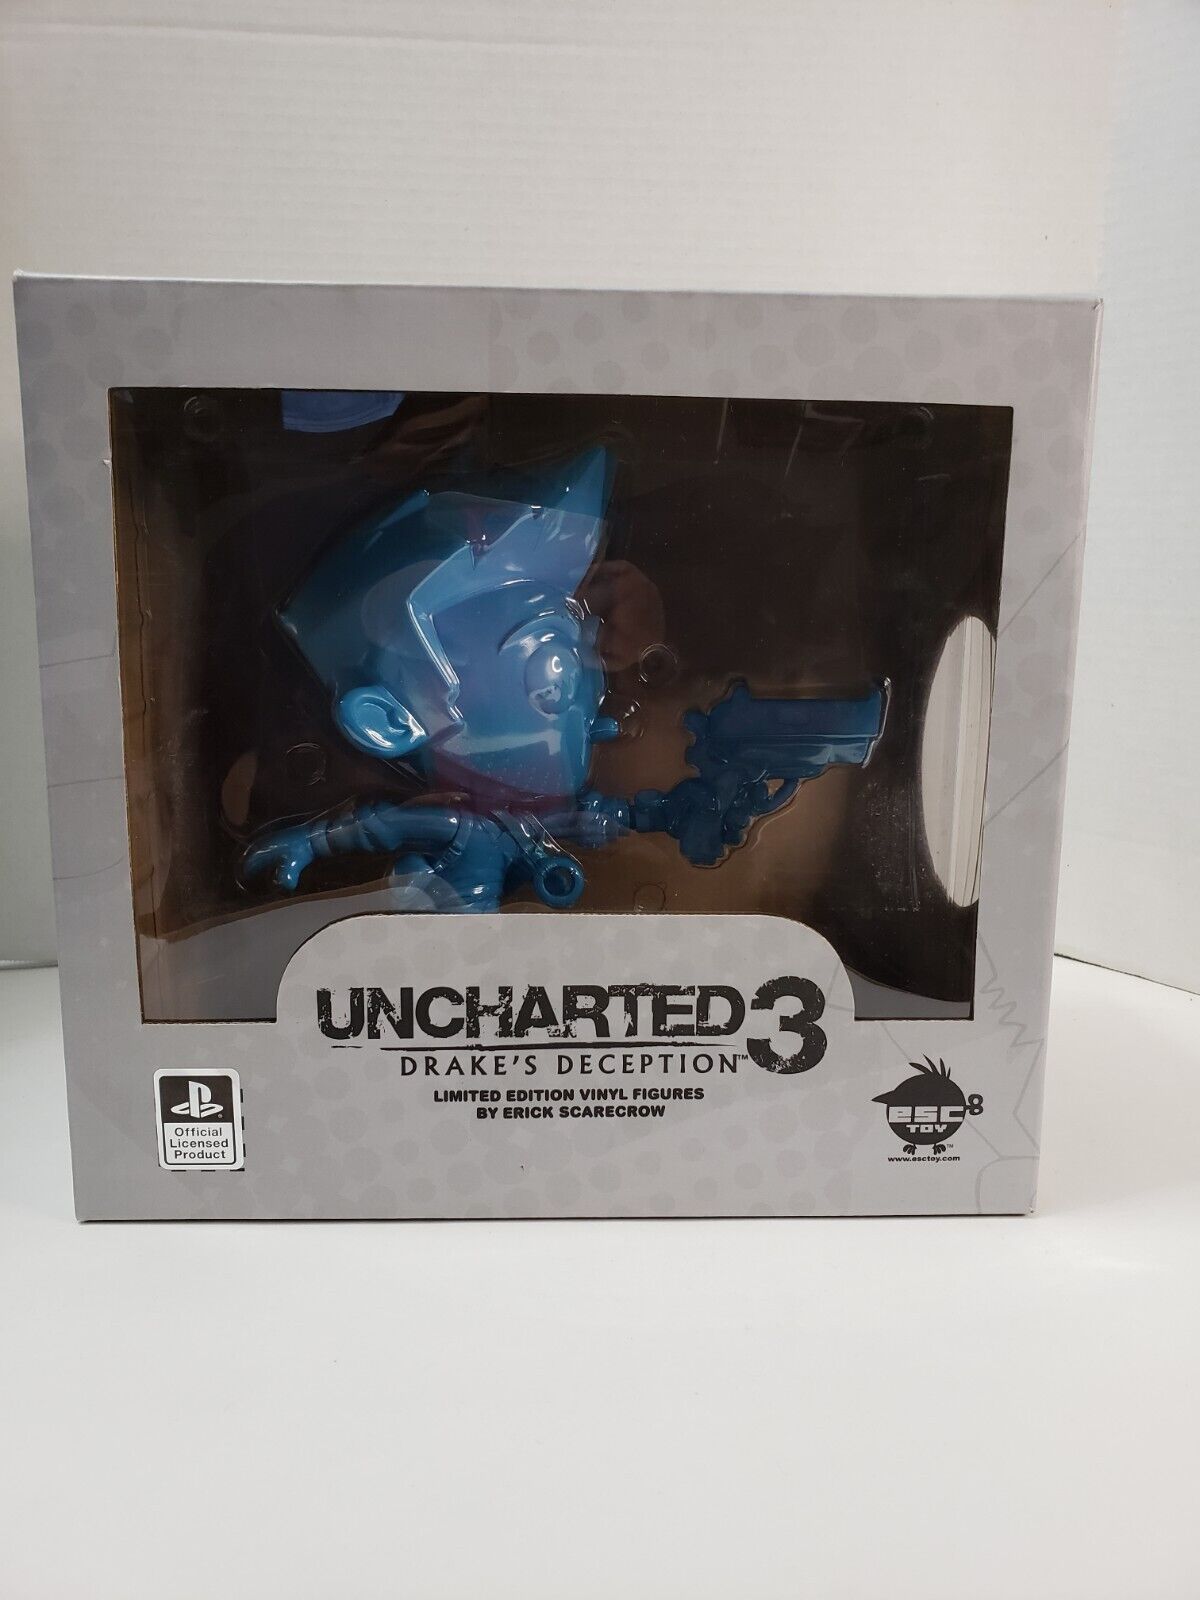 RARE: Uncharted 3 Drake\'s Deception Limited Edition Vinyl Figure